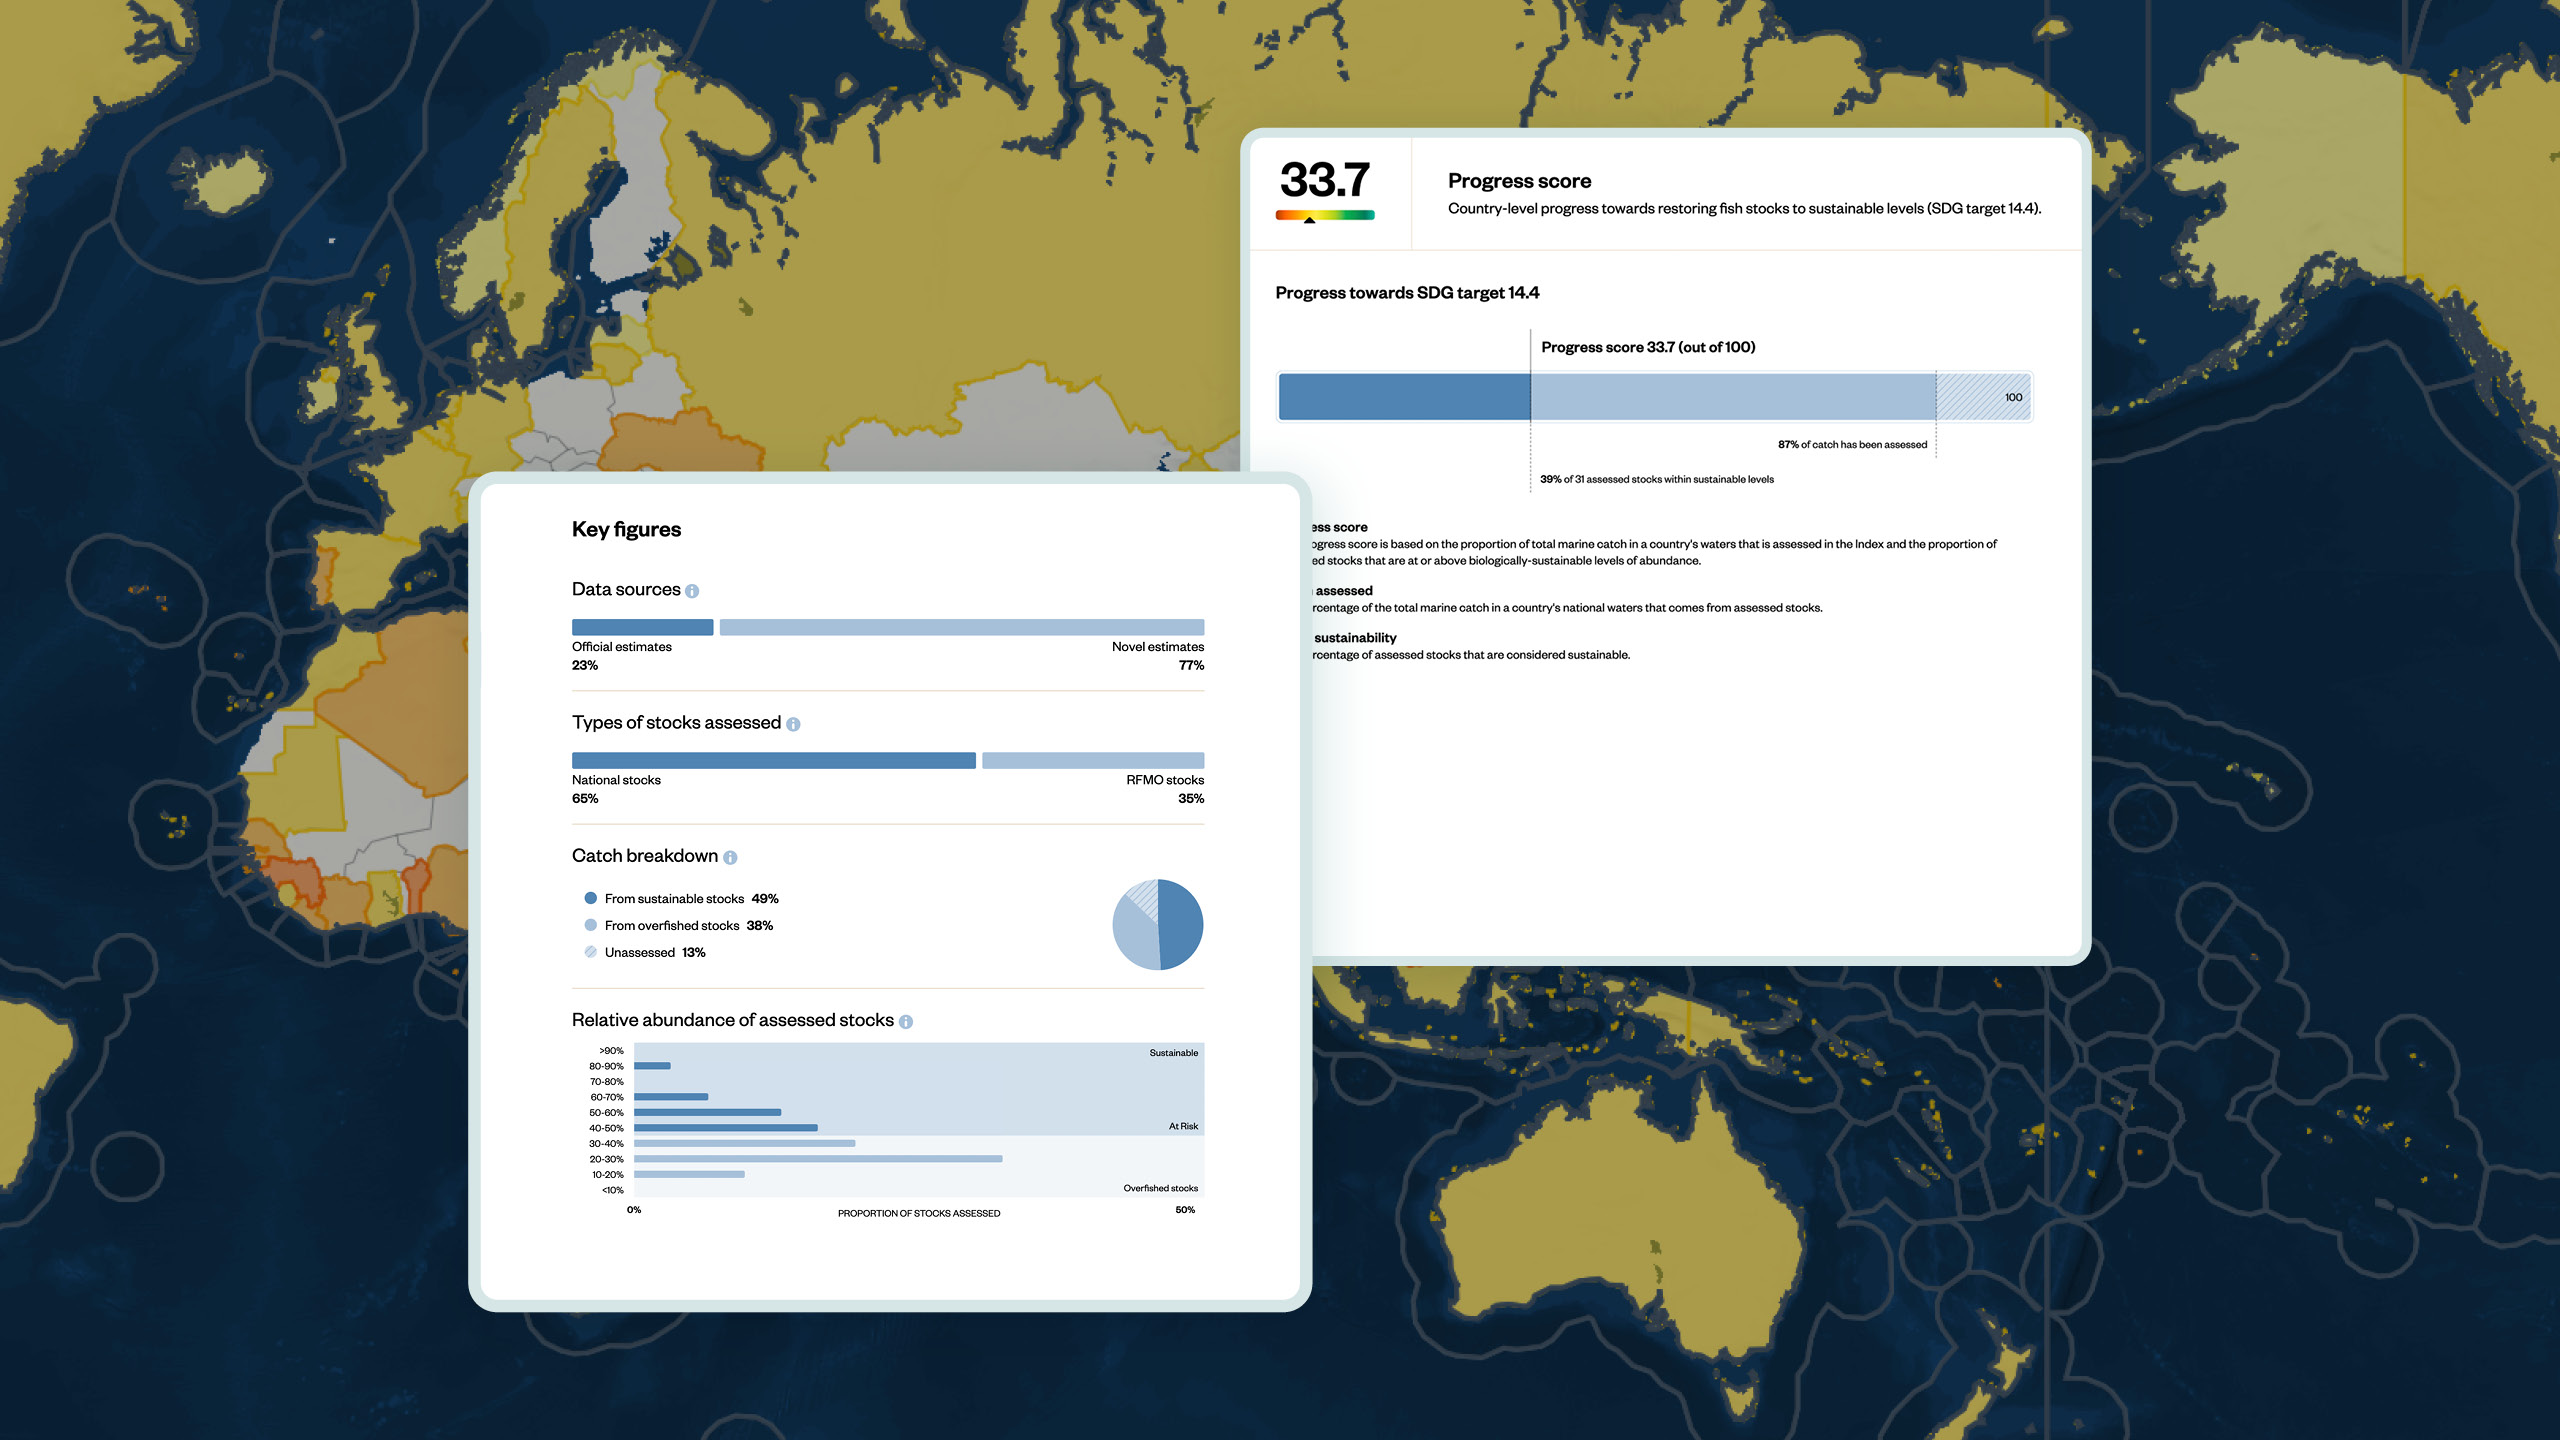 Two screenshots of the Global Fishing Index. One screenshot shows key figures through a series of graphs, the other shows a Progress Score.